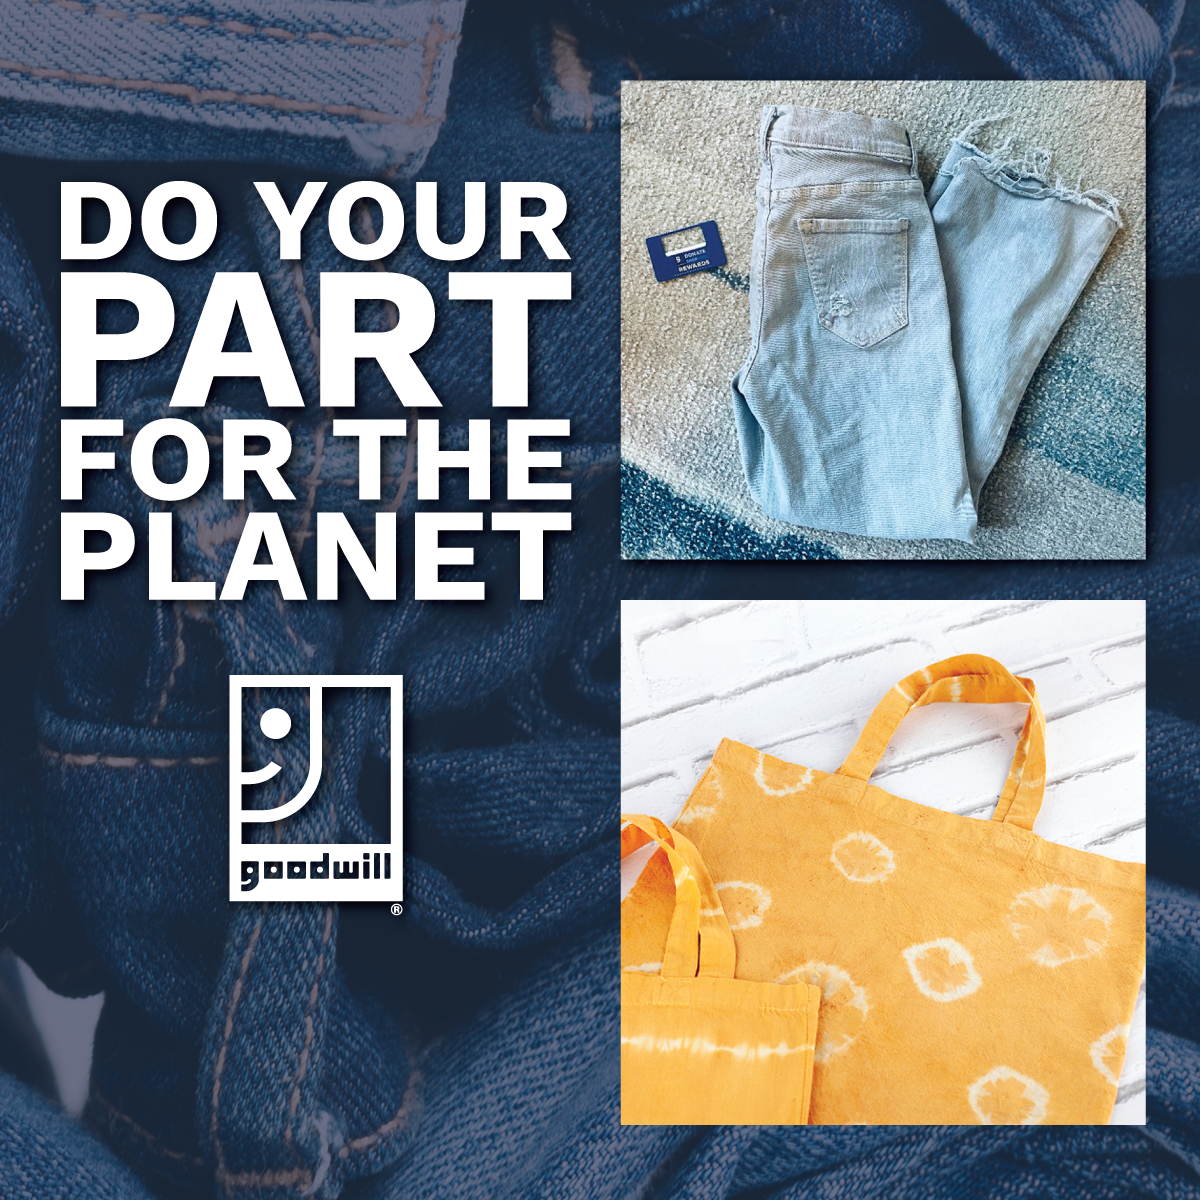 do your part - Shopping At Goodwill Can Help You Do Your Part for the Planet